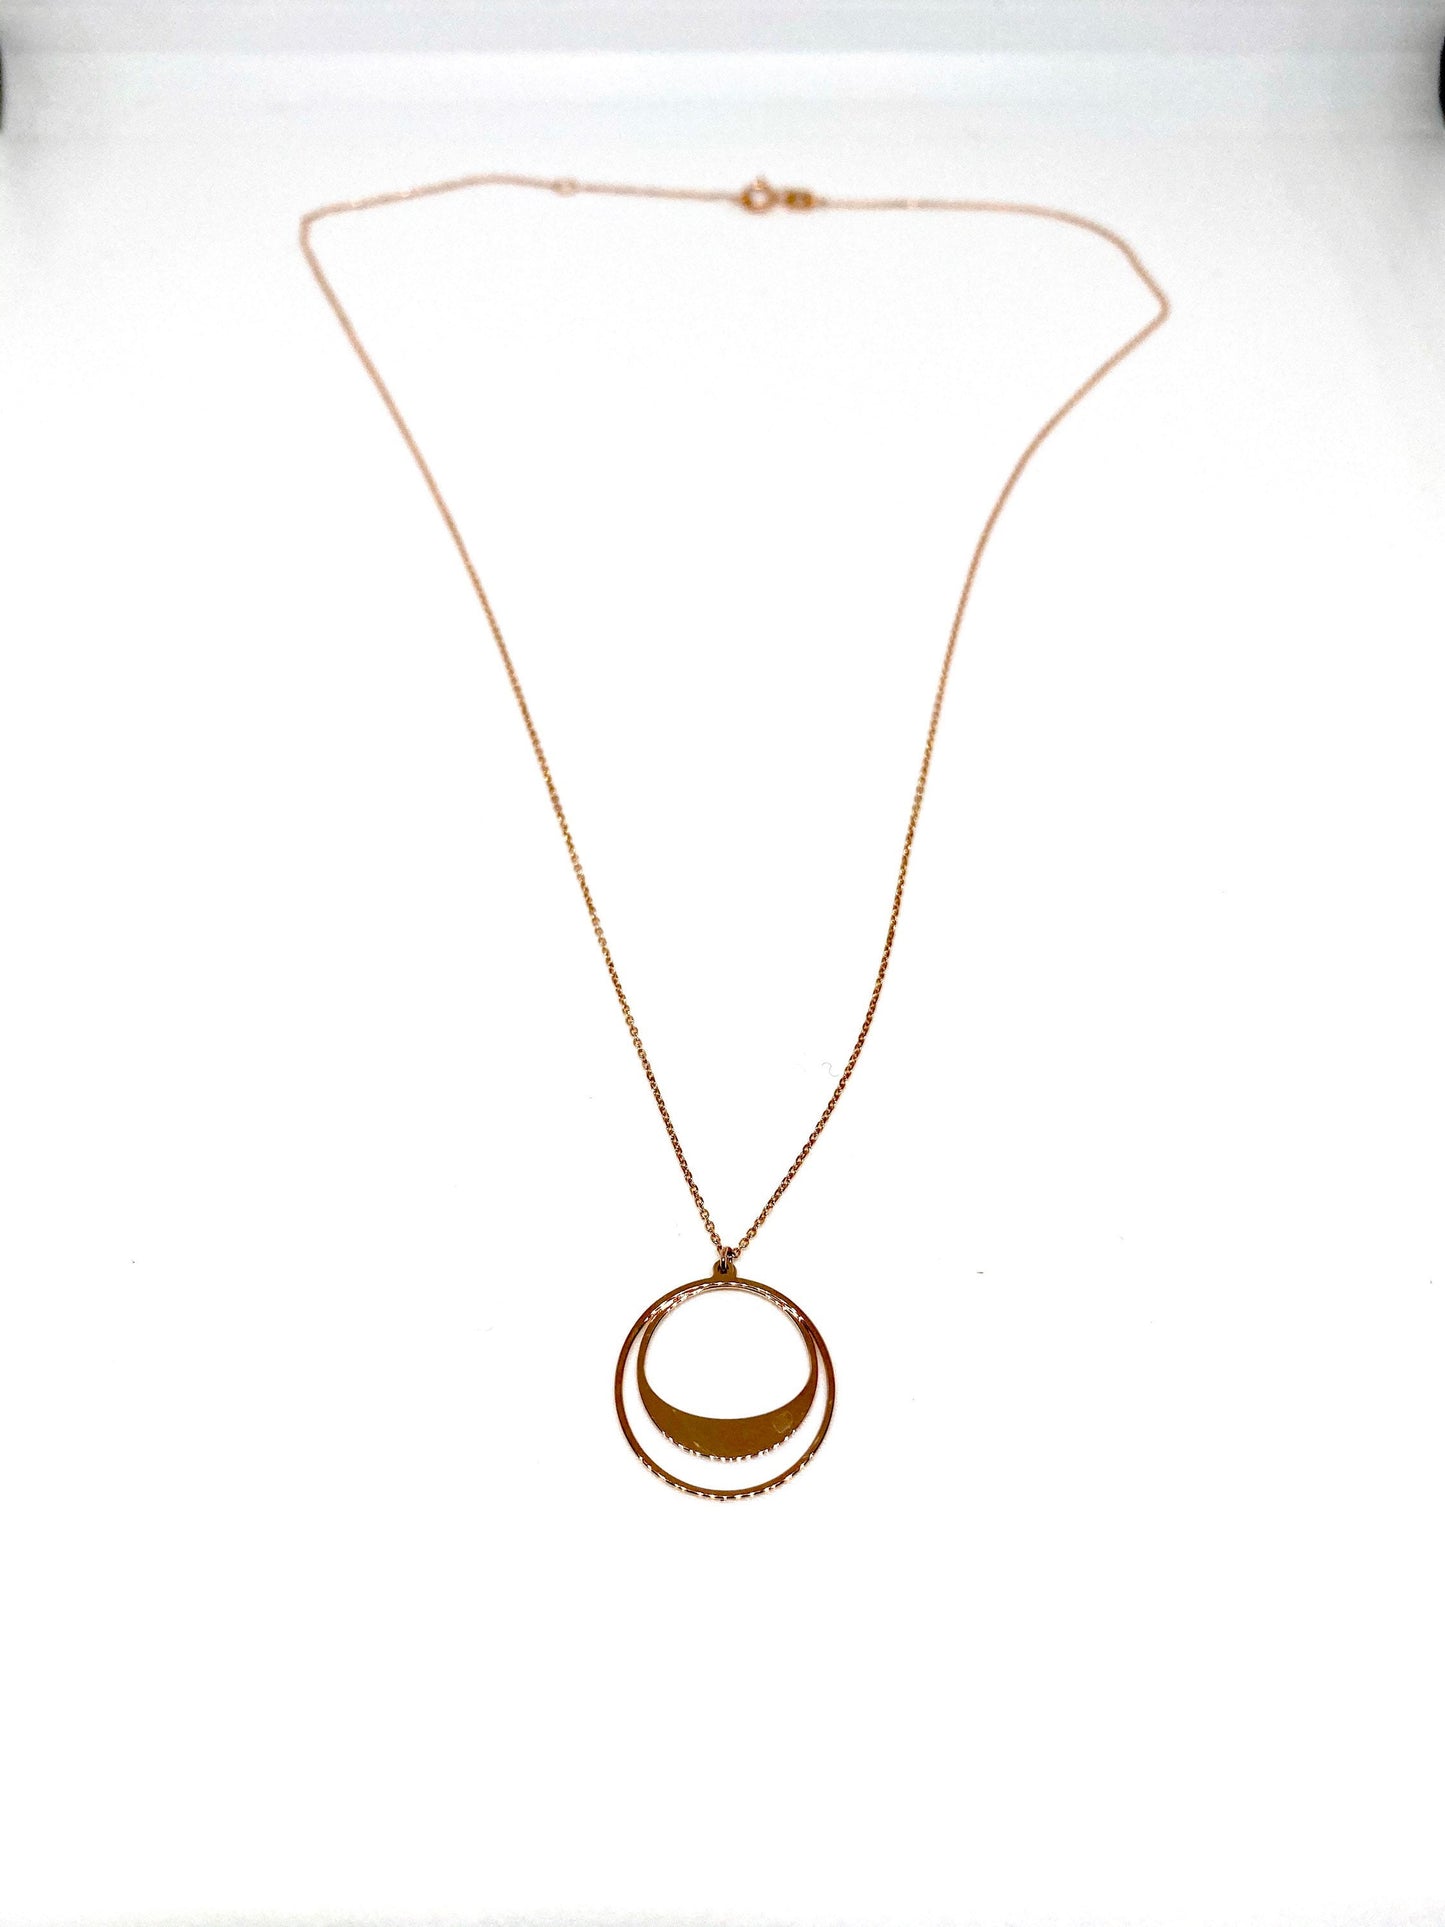 Rose Gold Graduated Circle Half Moon Pendant Chain Necklace